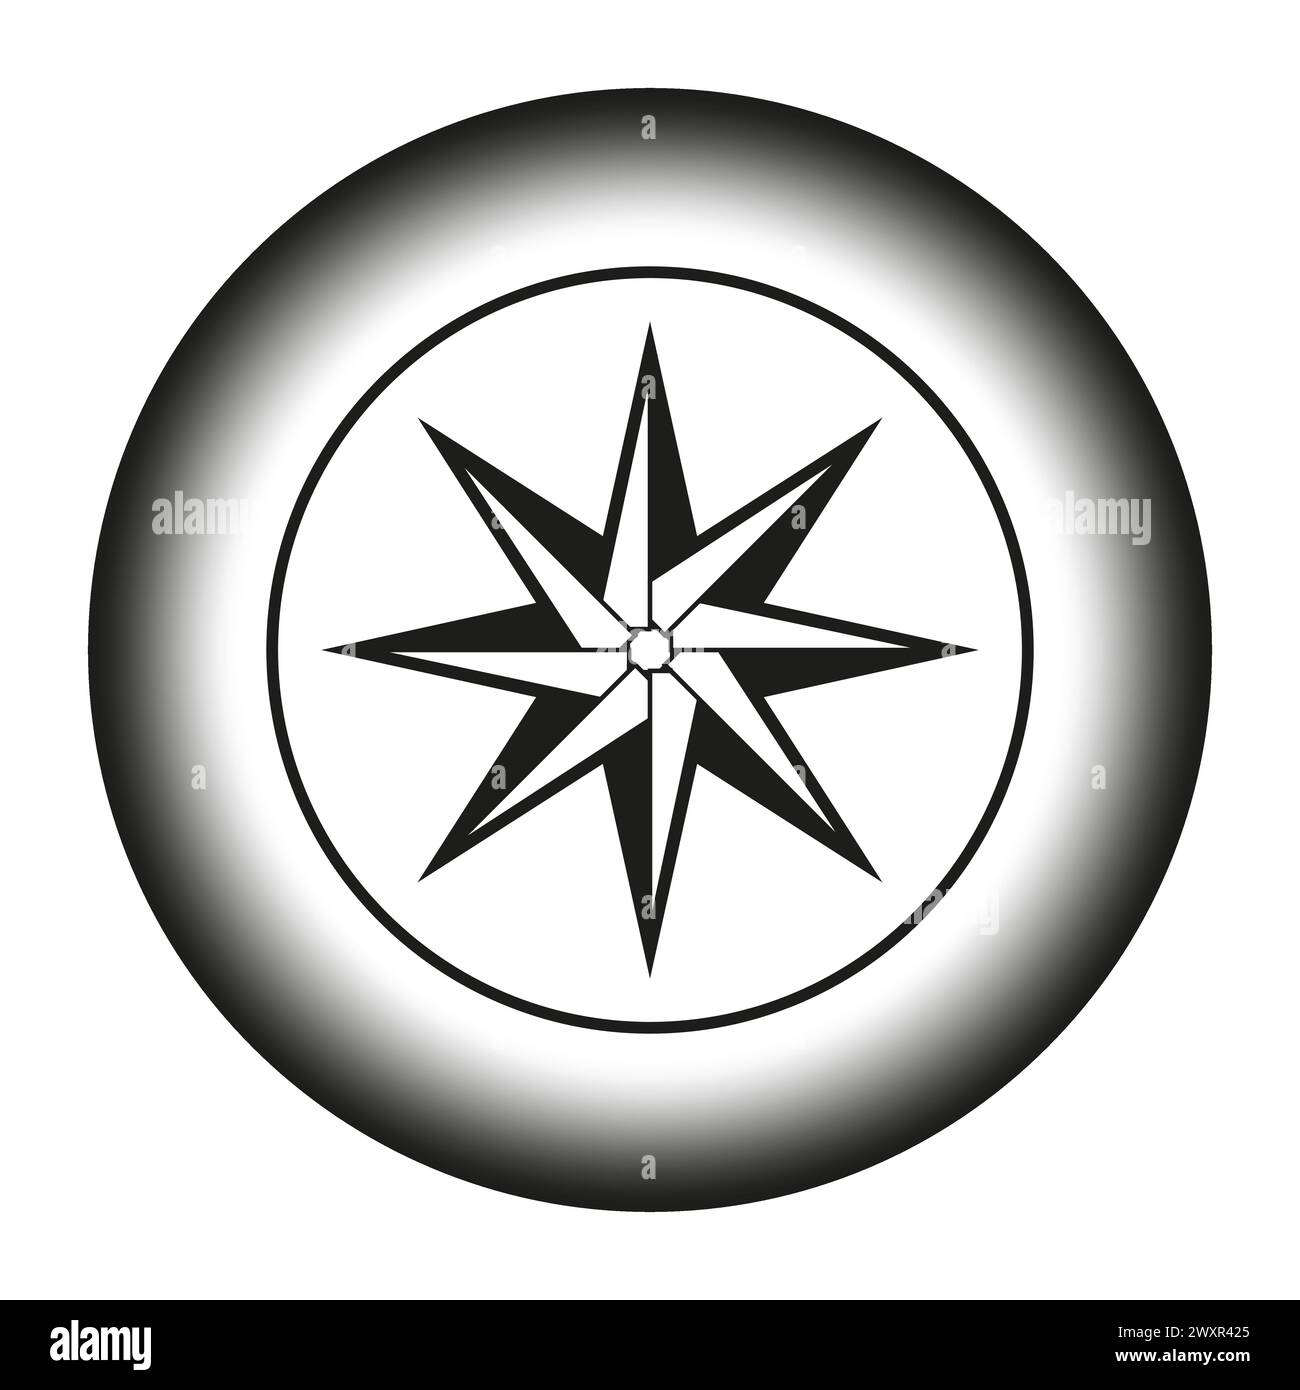 Compass rose navigation icon. Directional star symbol. Vector illustration. EPS 10. Stock Vector